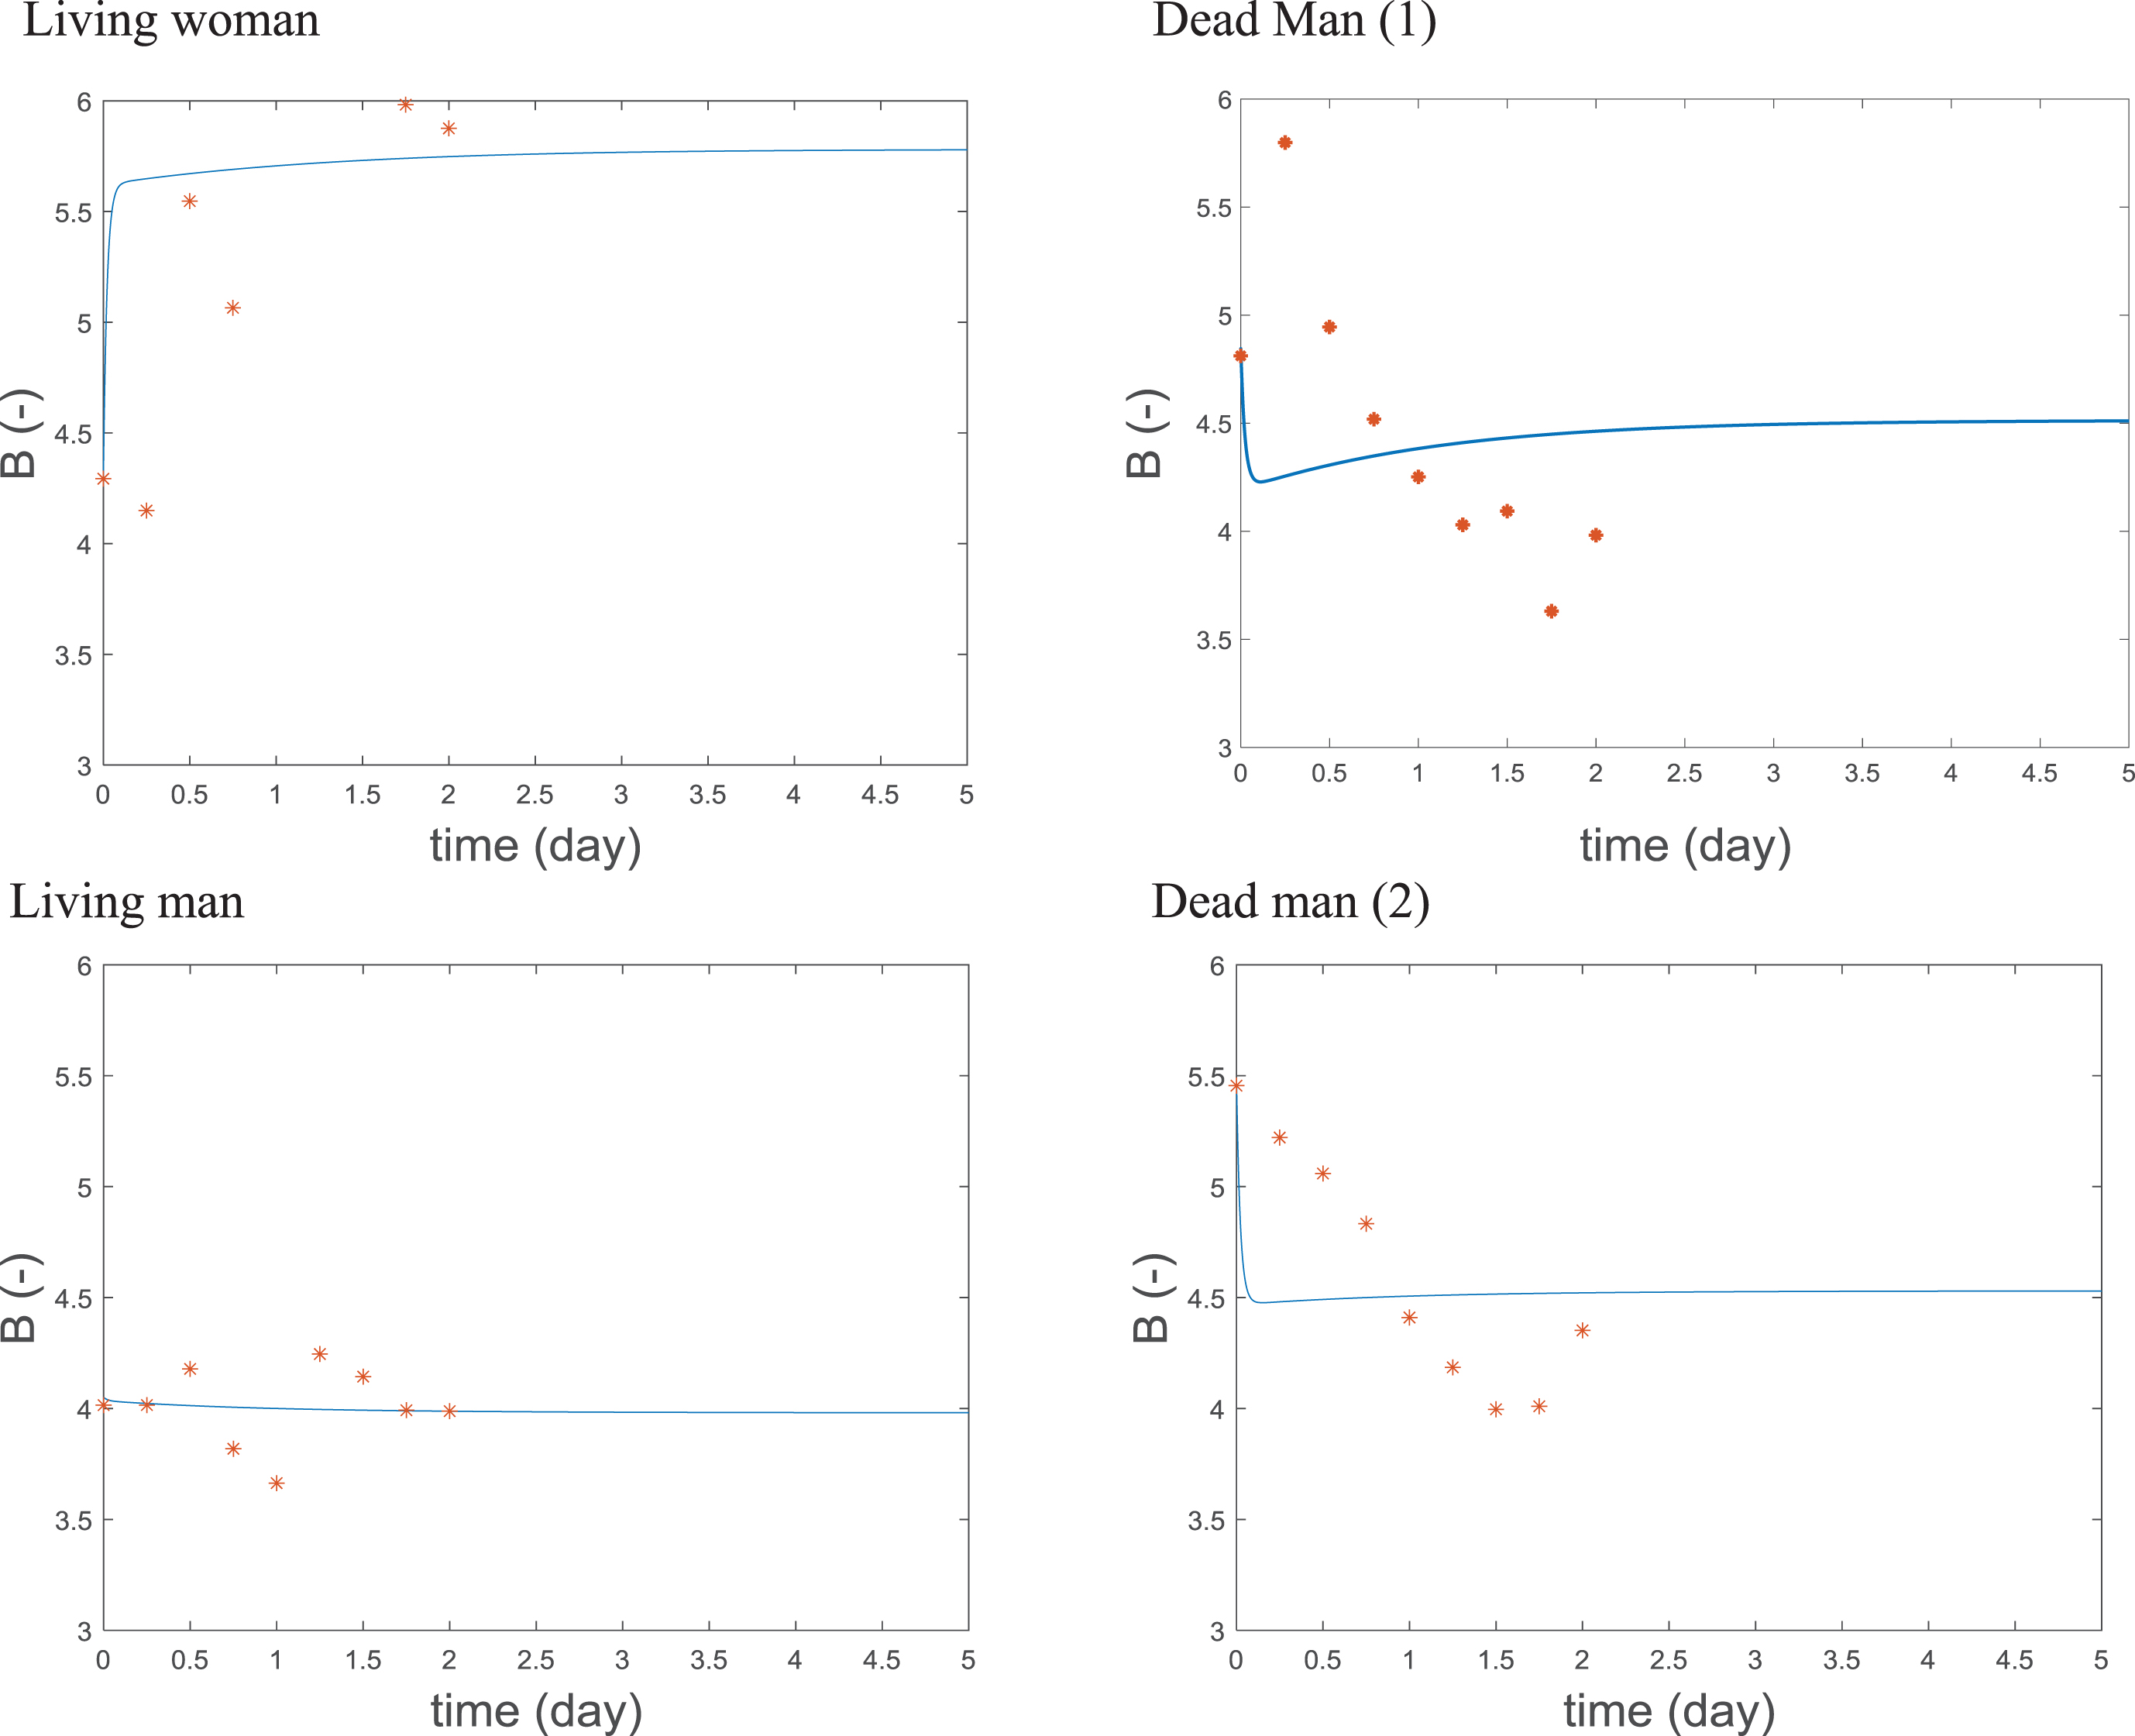 Calculated and measured anti-inflammatory cytokine B fluoresence versus time, markers indicate measured data, simulation results are shown as lines.